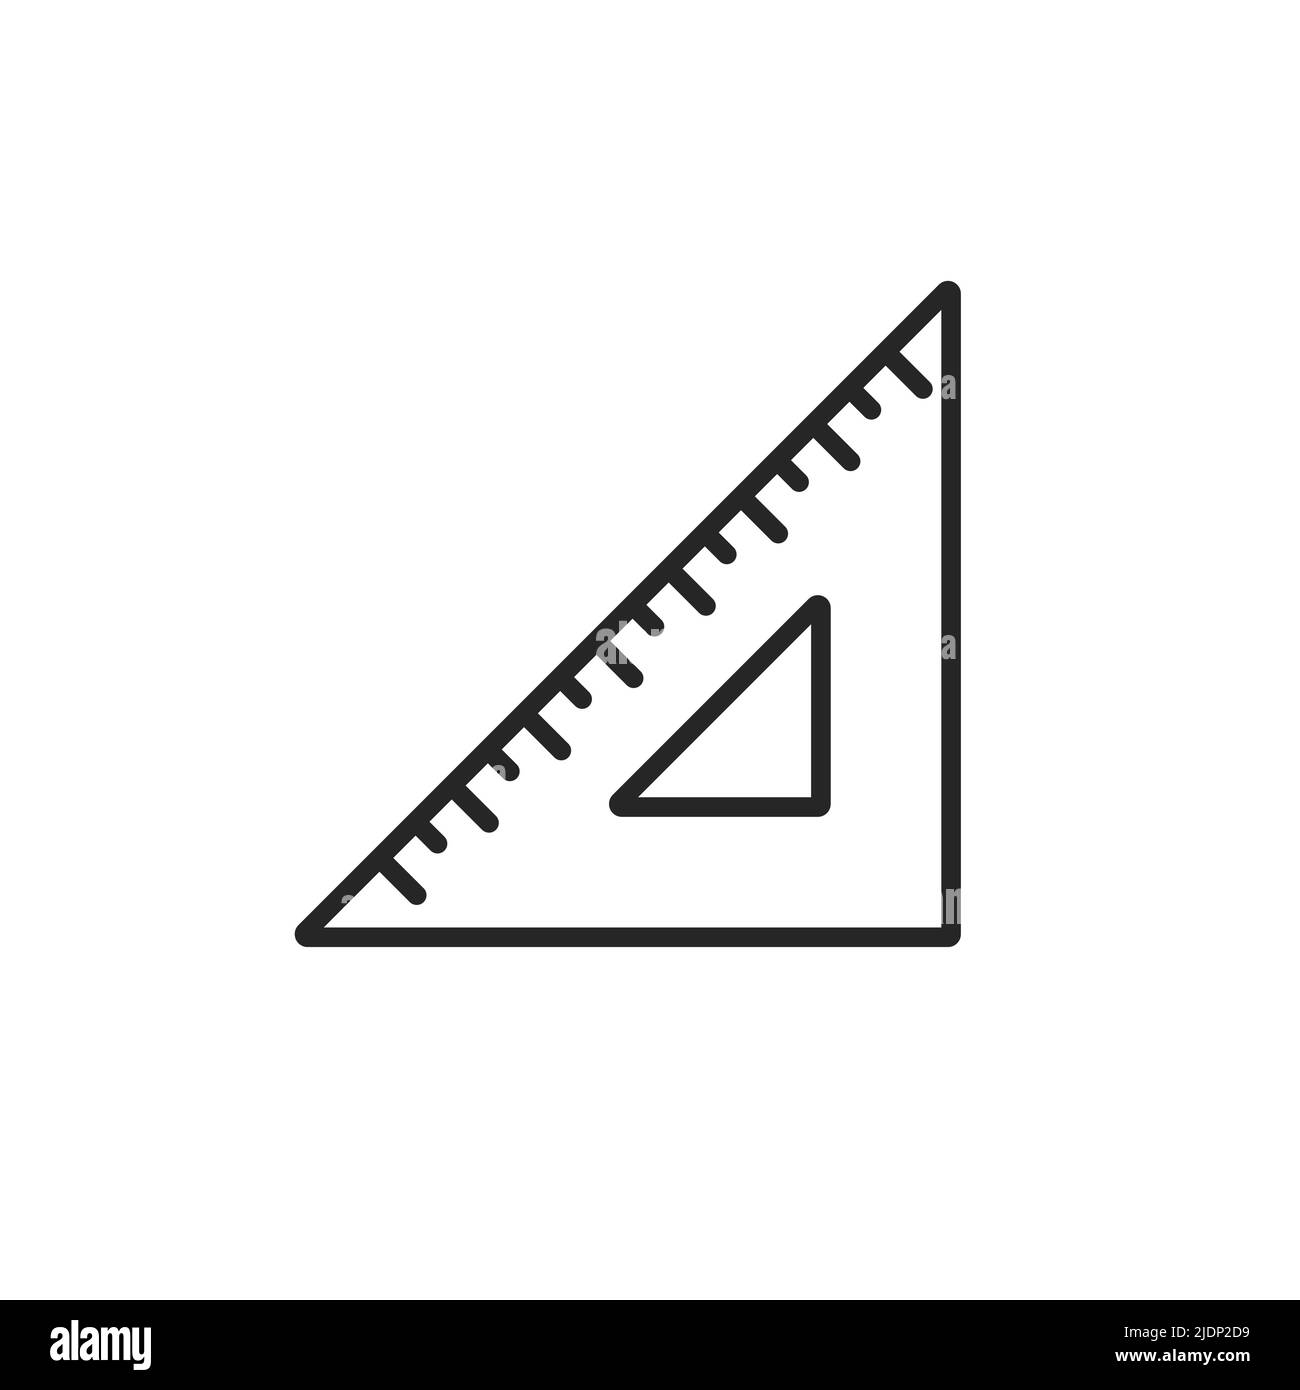 90 Degrees Angle Outline Icon Linear Stock Vector (Royalty Free